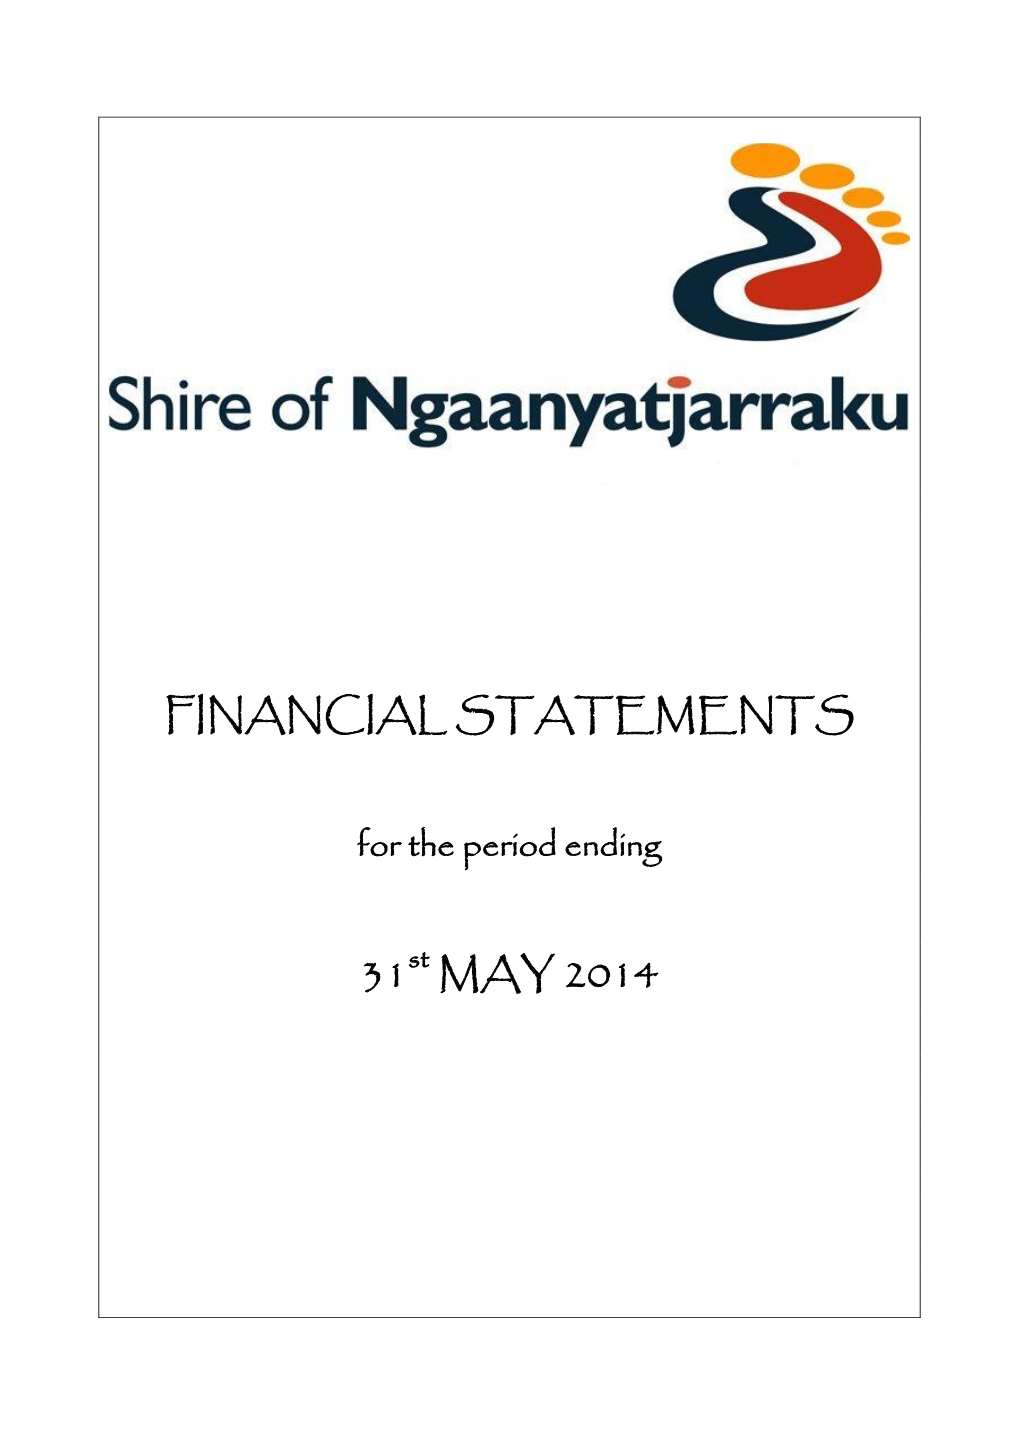 FINANCIAL STATEMENTS 31St MAY 2014